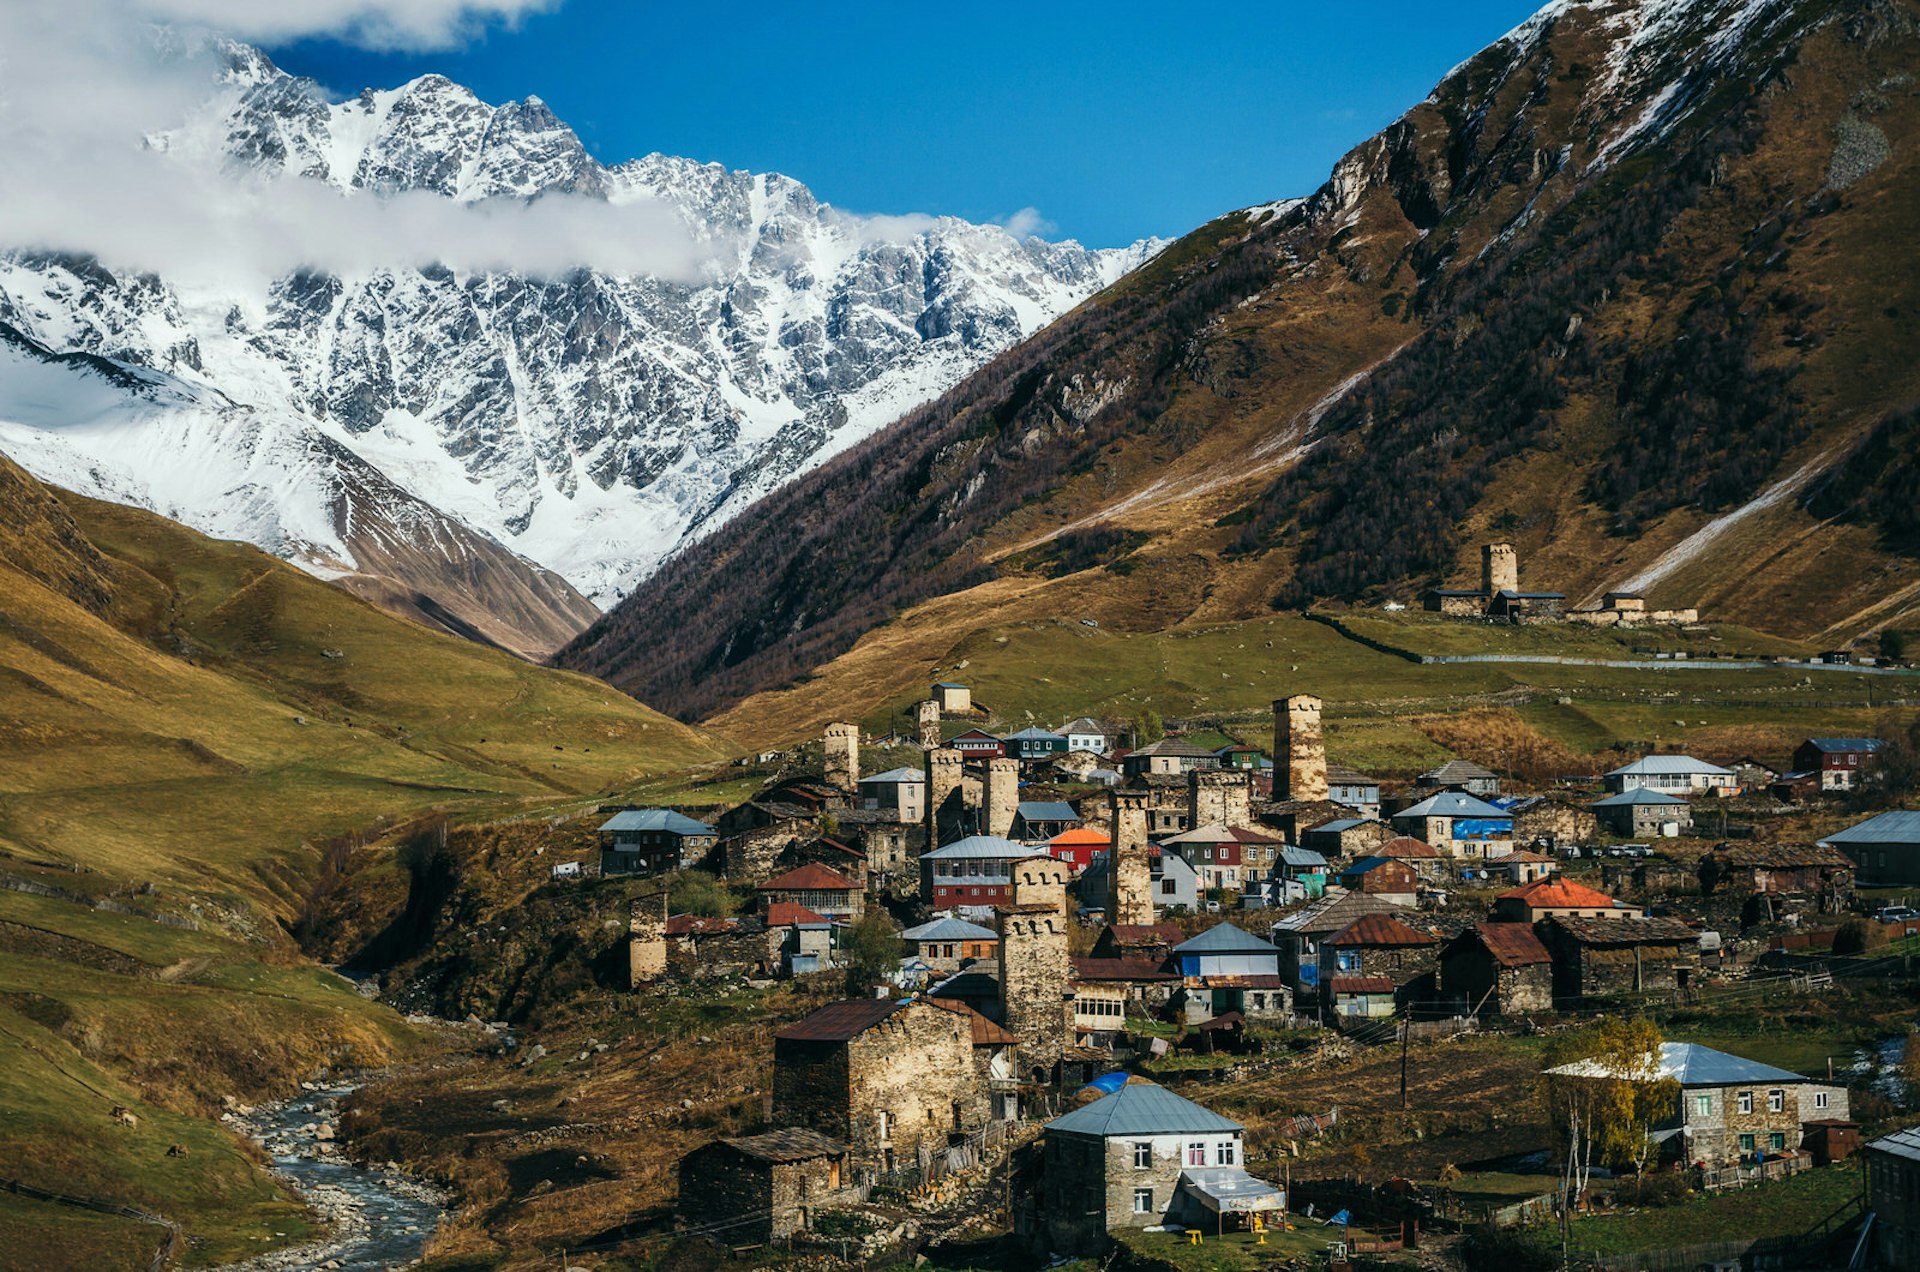 Svanetian Towers in Ushguli in autumn. One of the highest inhabited village in Europe © Andrei Bortnikau / Getty Images